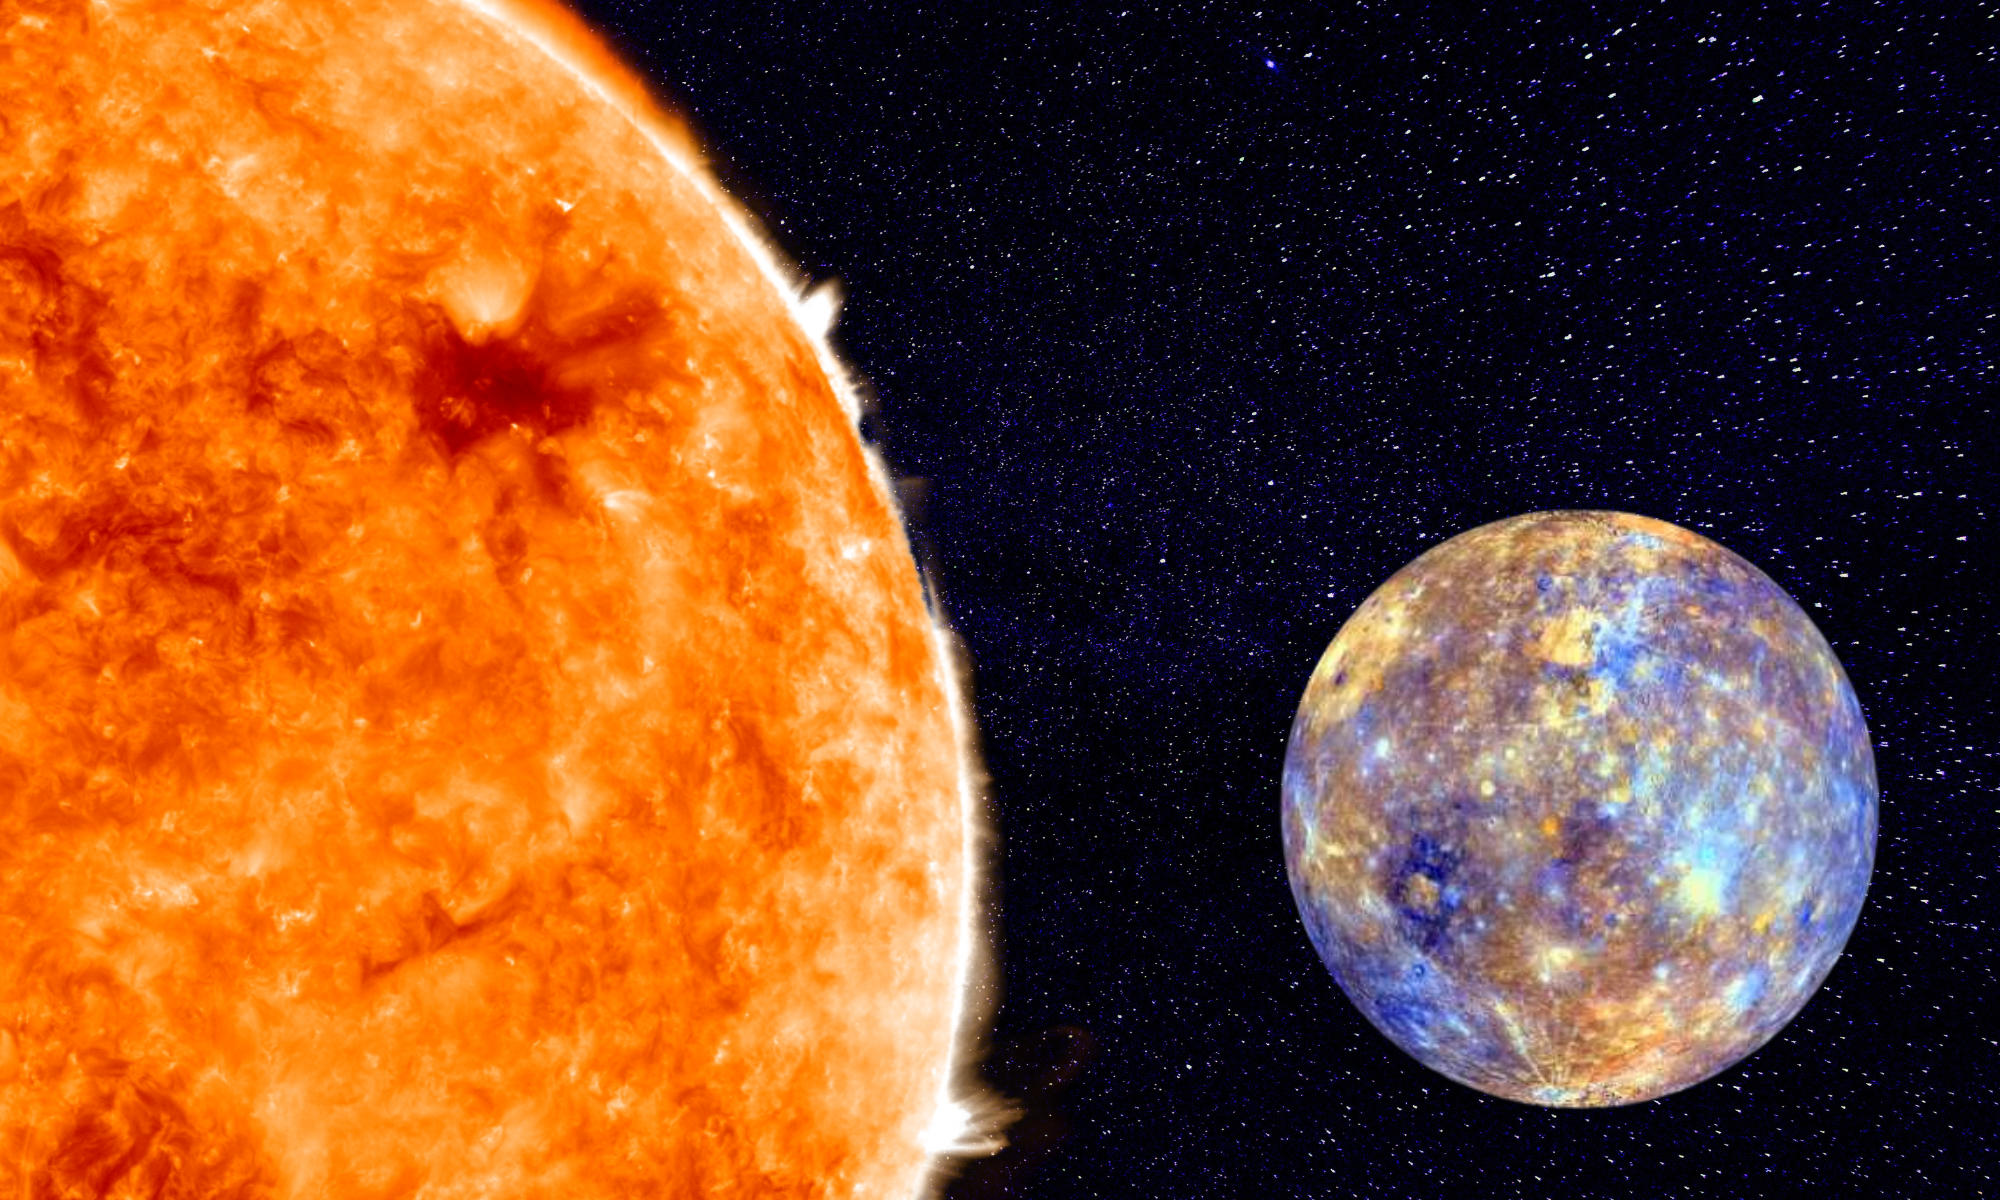 Mercury, the planet closest to the sun, can be difficult to see in the star's glare.